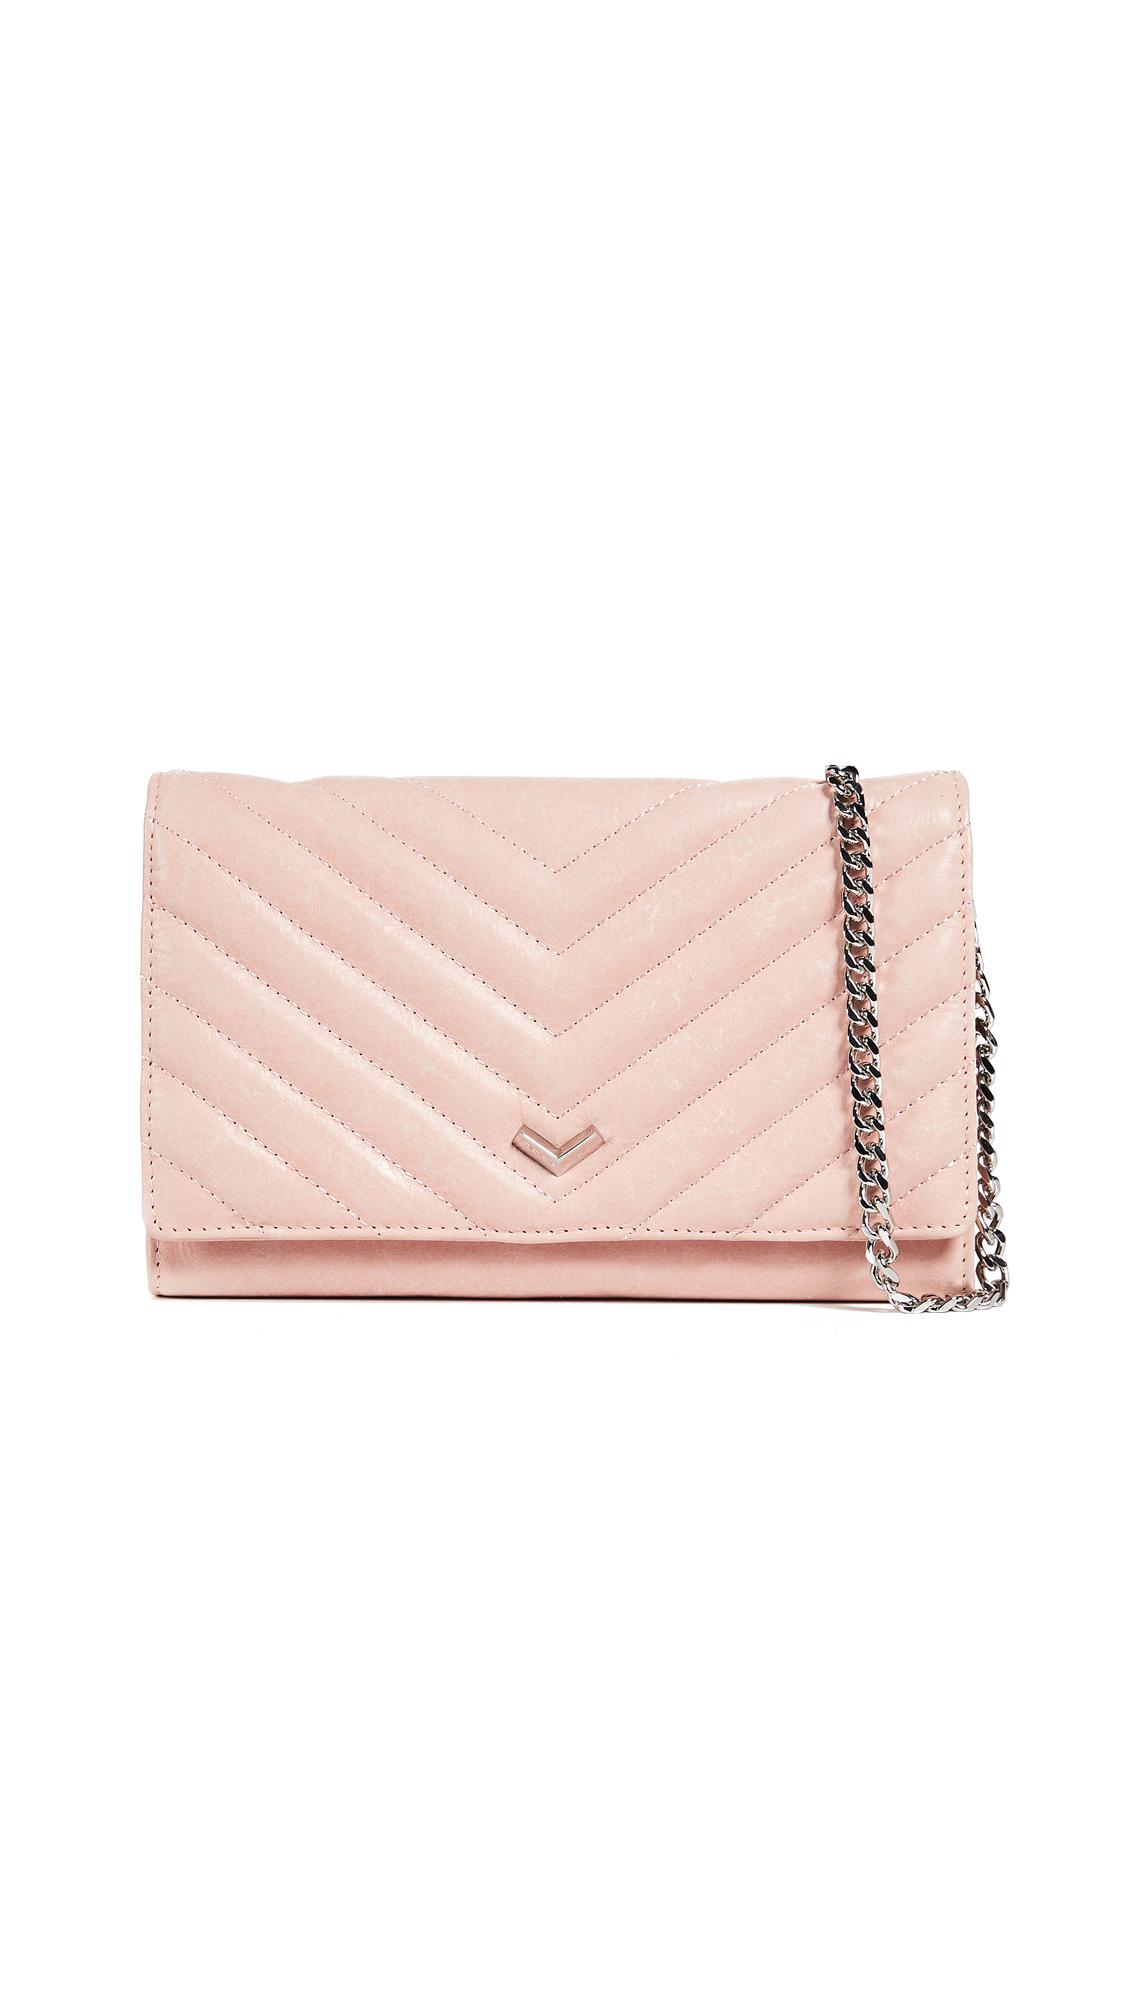 botkier soho quilted leather chain wallet